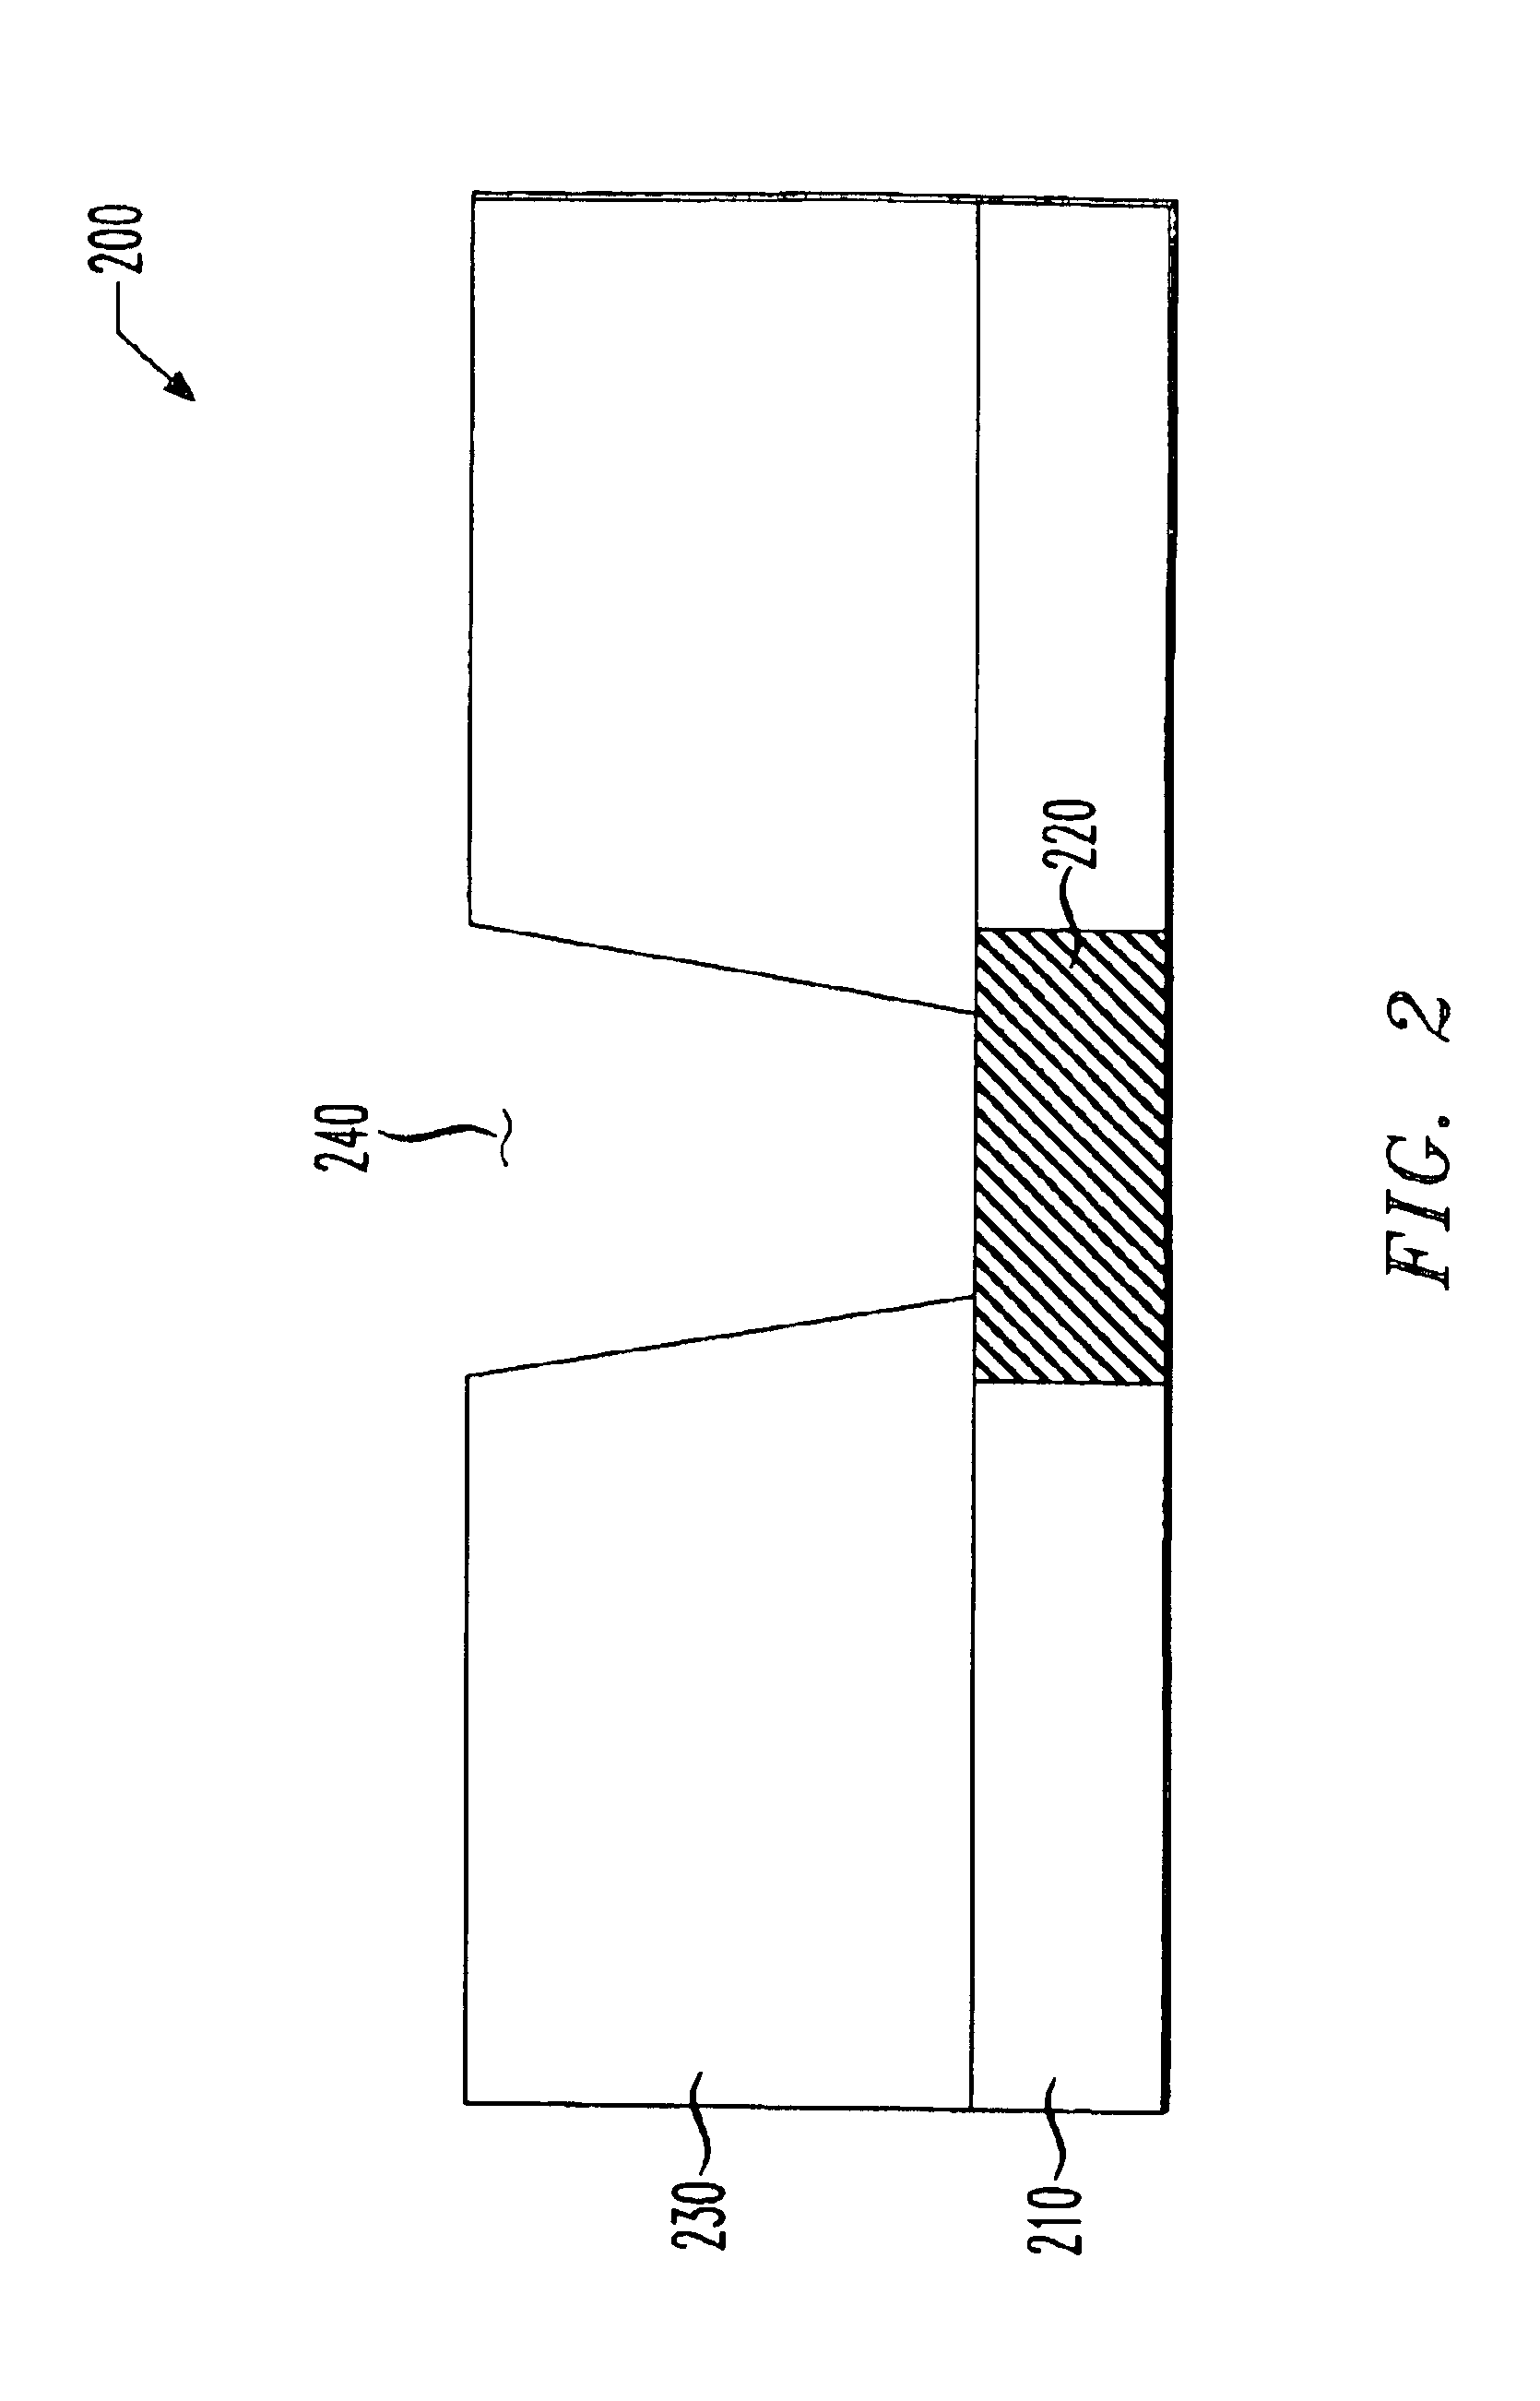 Contact for use in an integrated circuit and a method of manufacture therefor